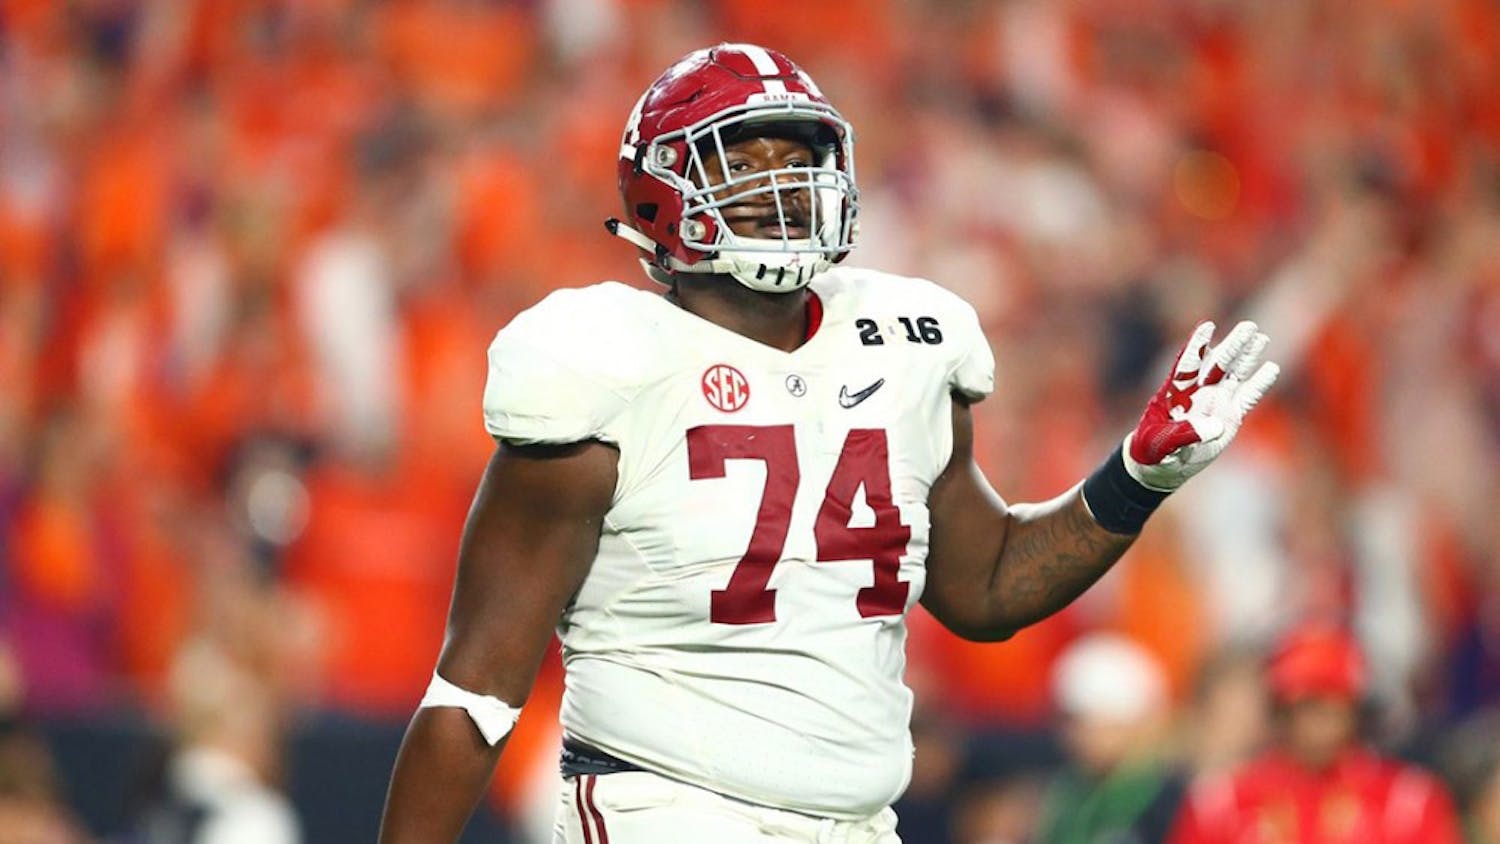 Cam Robinson is being allowed to escape punishment after looking at potential felony charges, and according to the DA himself, the primary reason is because of how hard he worked to become a potential top-5 draft pick.